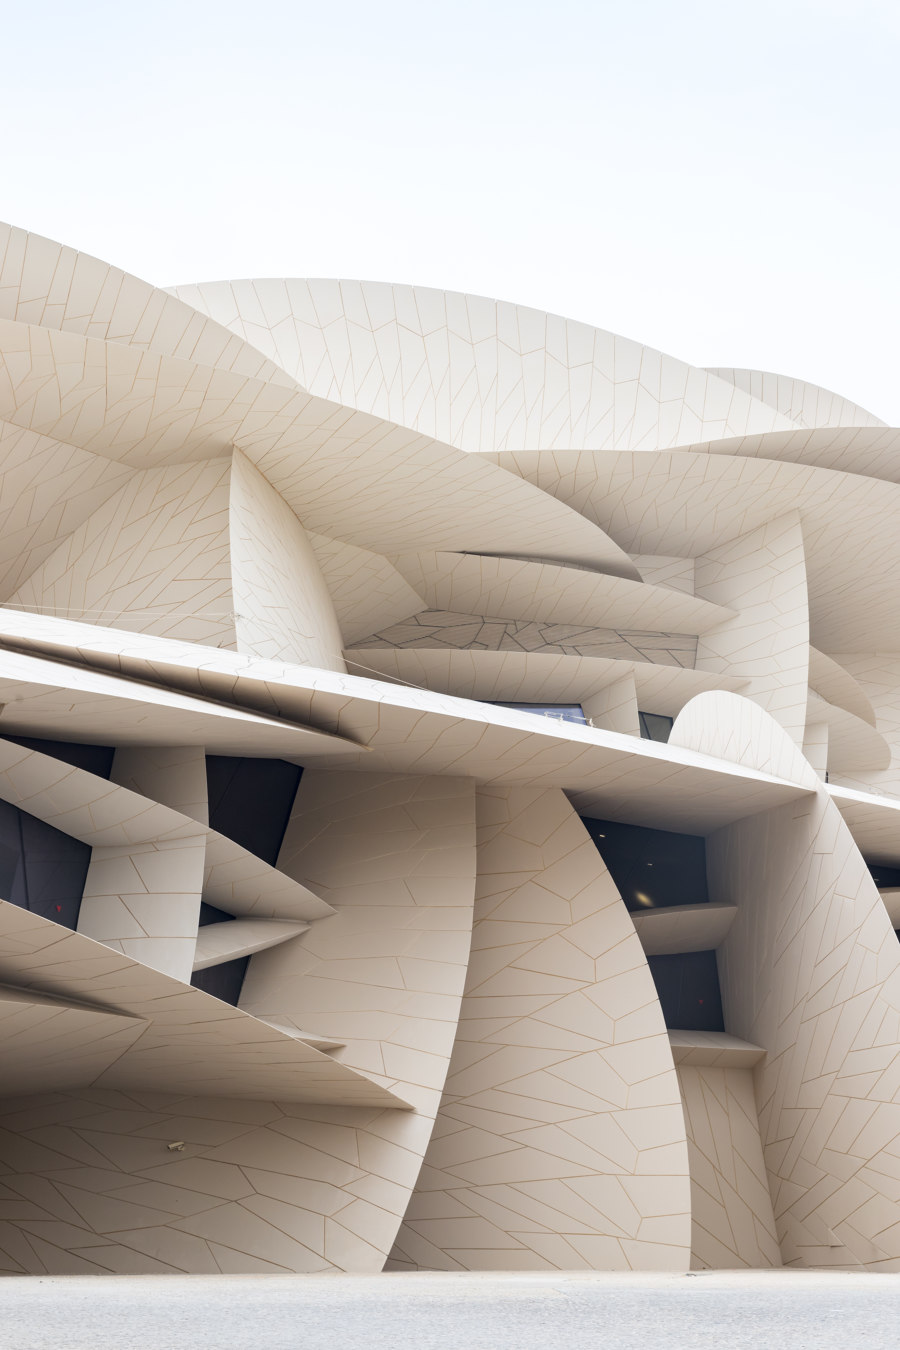 National Museum of Qatar by Ateliers Jean Nouvel | Museums